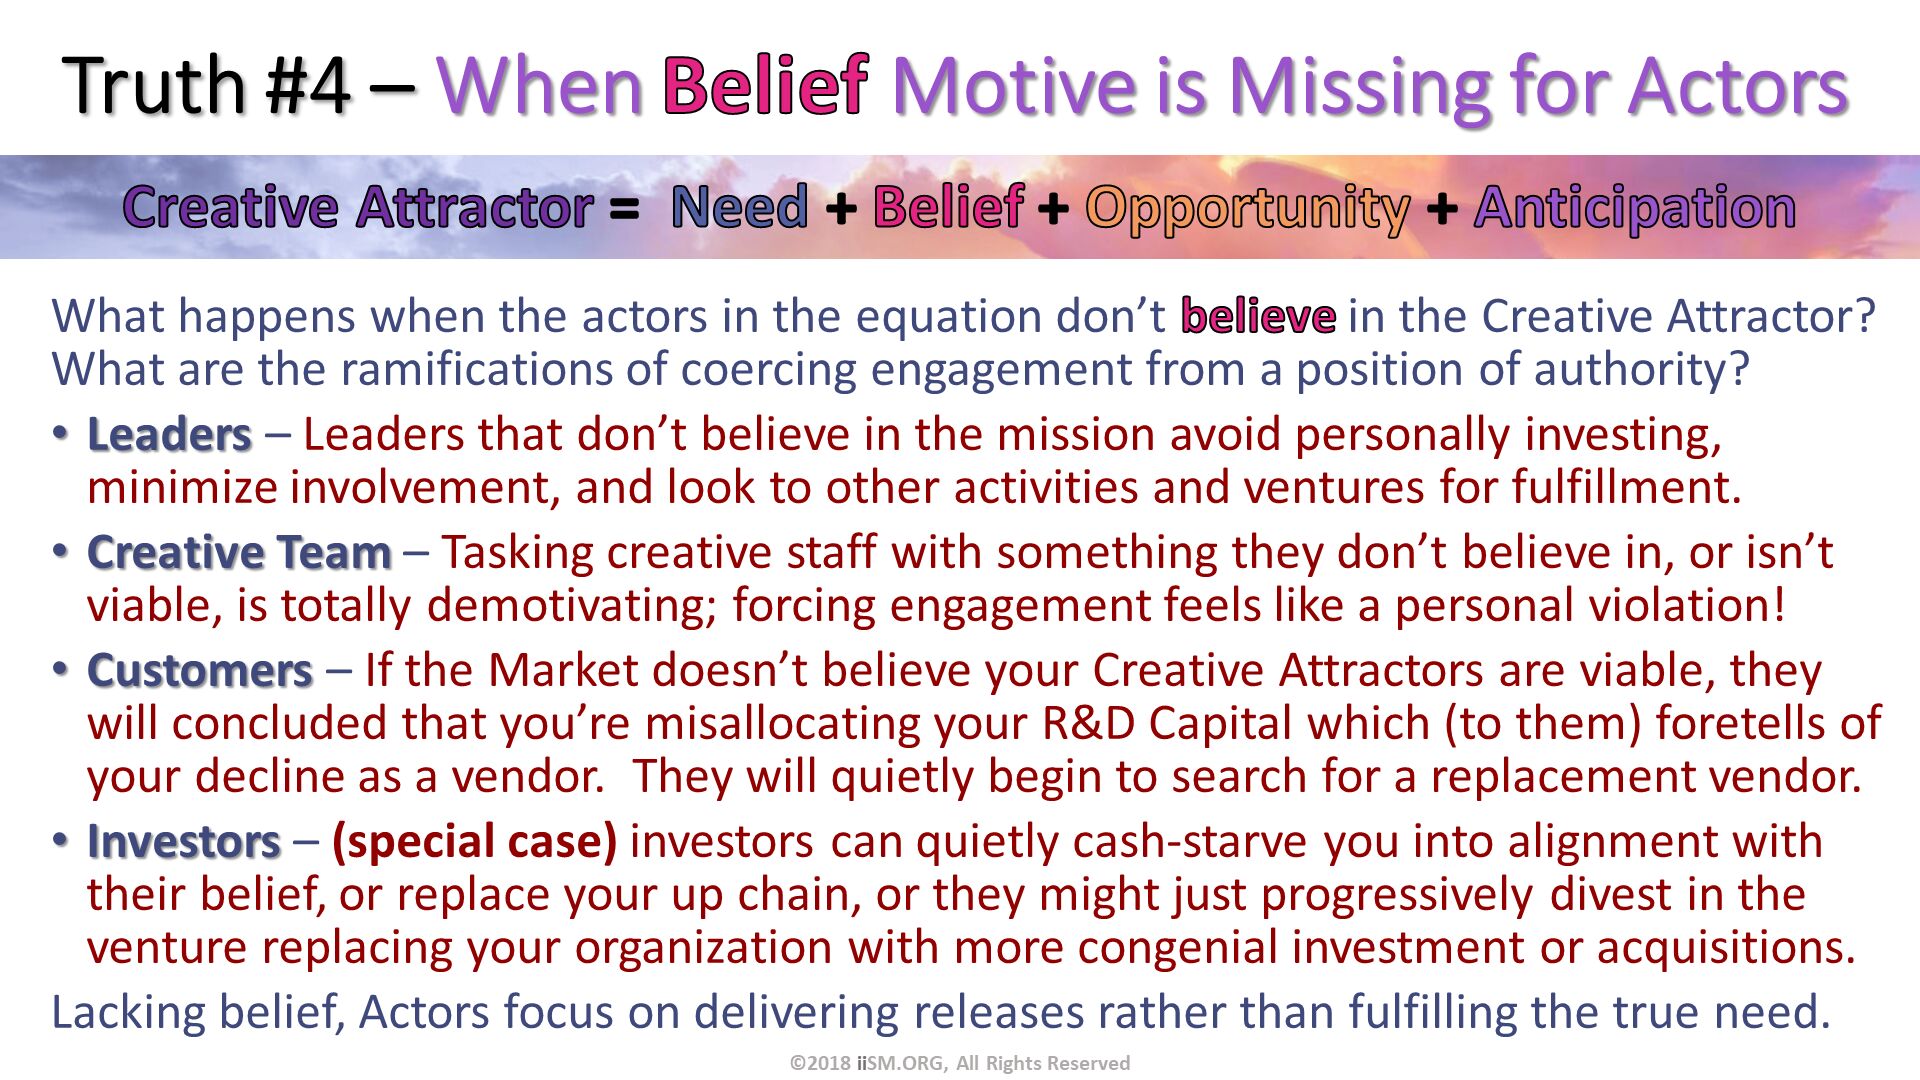 Truth #4 – When Belief Motive is Missing for Actors. What happens when the actors in the equation don’t believe in the Creative Attractor?  What are the ramifications of coercing engagement from a position of authority? 
Leaders – Leaders that don’t believe in the mission avoid personally investing, minimize involvement, and look to other activities and ventures for fulfillment.
Creative Team – Tasking creative staff with something they don’t believe in, or isn’t viable, is totally demotivating; forcing engagement feels like a personal violation!
Customers – If the Market doesn’t believe your Creative Attractors are viable, they will concluded that you’re misallocating your R&D Capital which (to them) foretells of your decline as a vendor.  They will quietly begin to search for a replacement vendor.
Investors – (special case) investors can quietly cash-starve you into alignment with their belief, or replace your up chain, or they might just progressively divest in the venture replacing your organization with more congenial investment or acquisitions.
Lacking belief, Actors focus on delivering releases rather than fulfilling the true need. ©2018 iiSM.ORG, All Rights Reserved. 